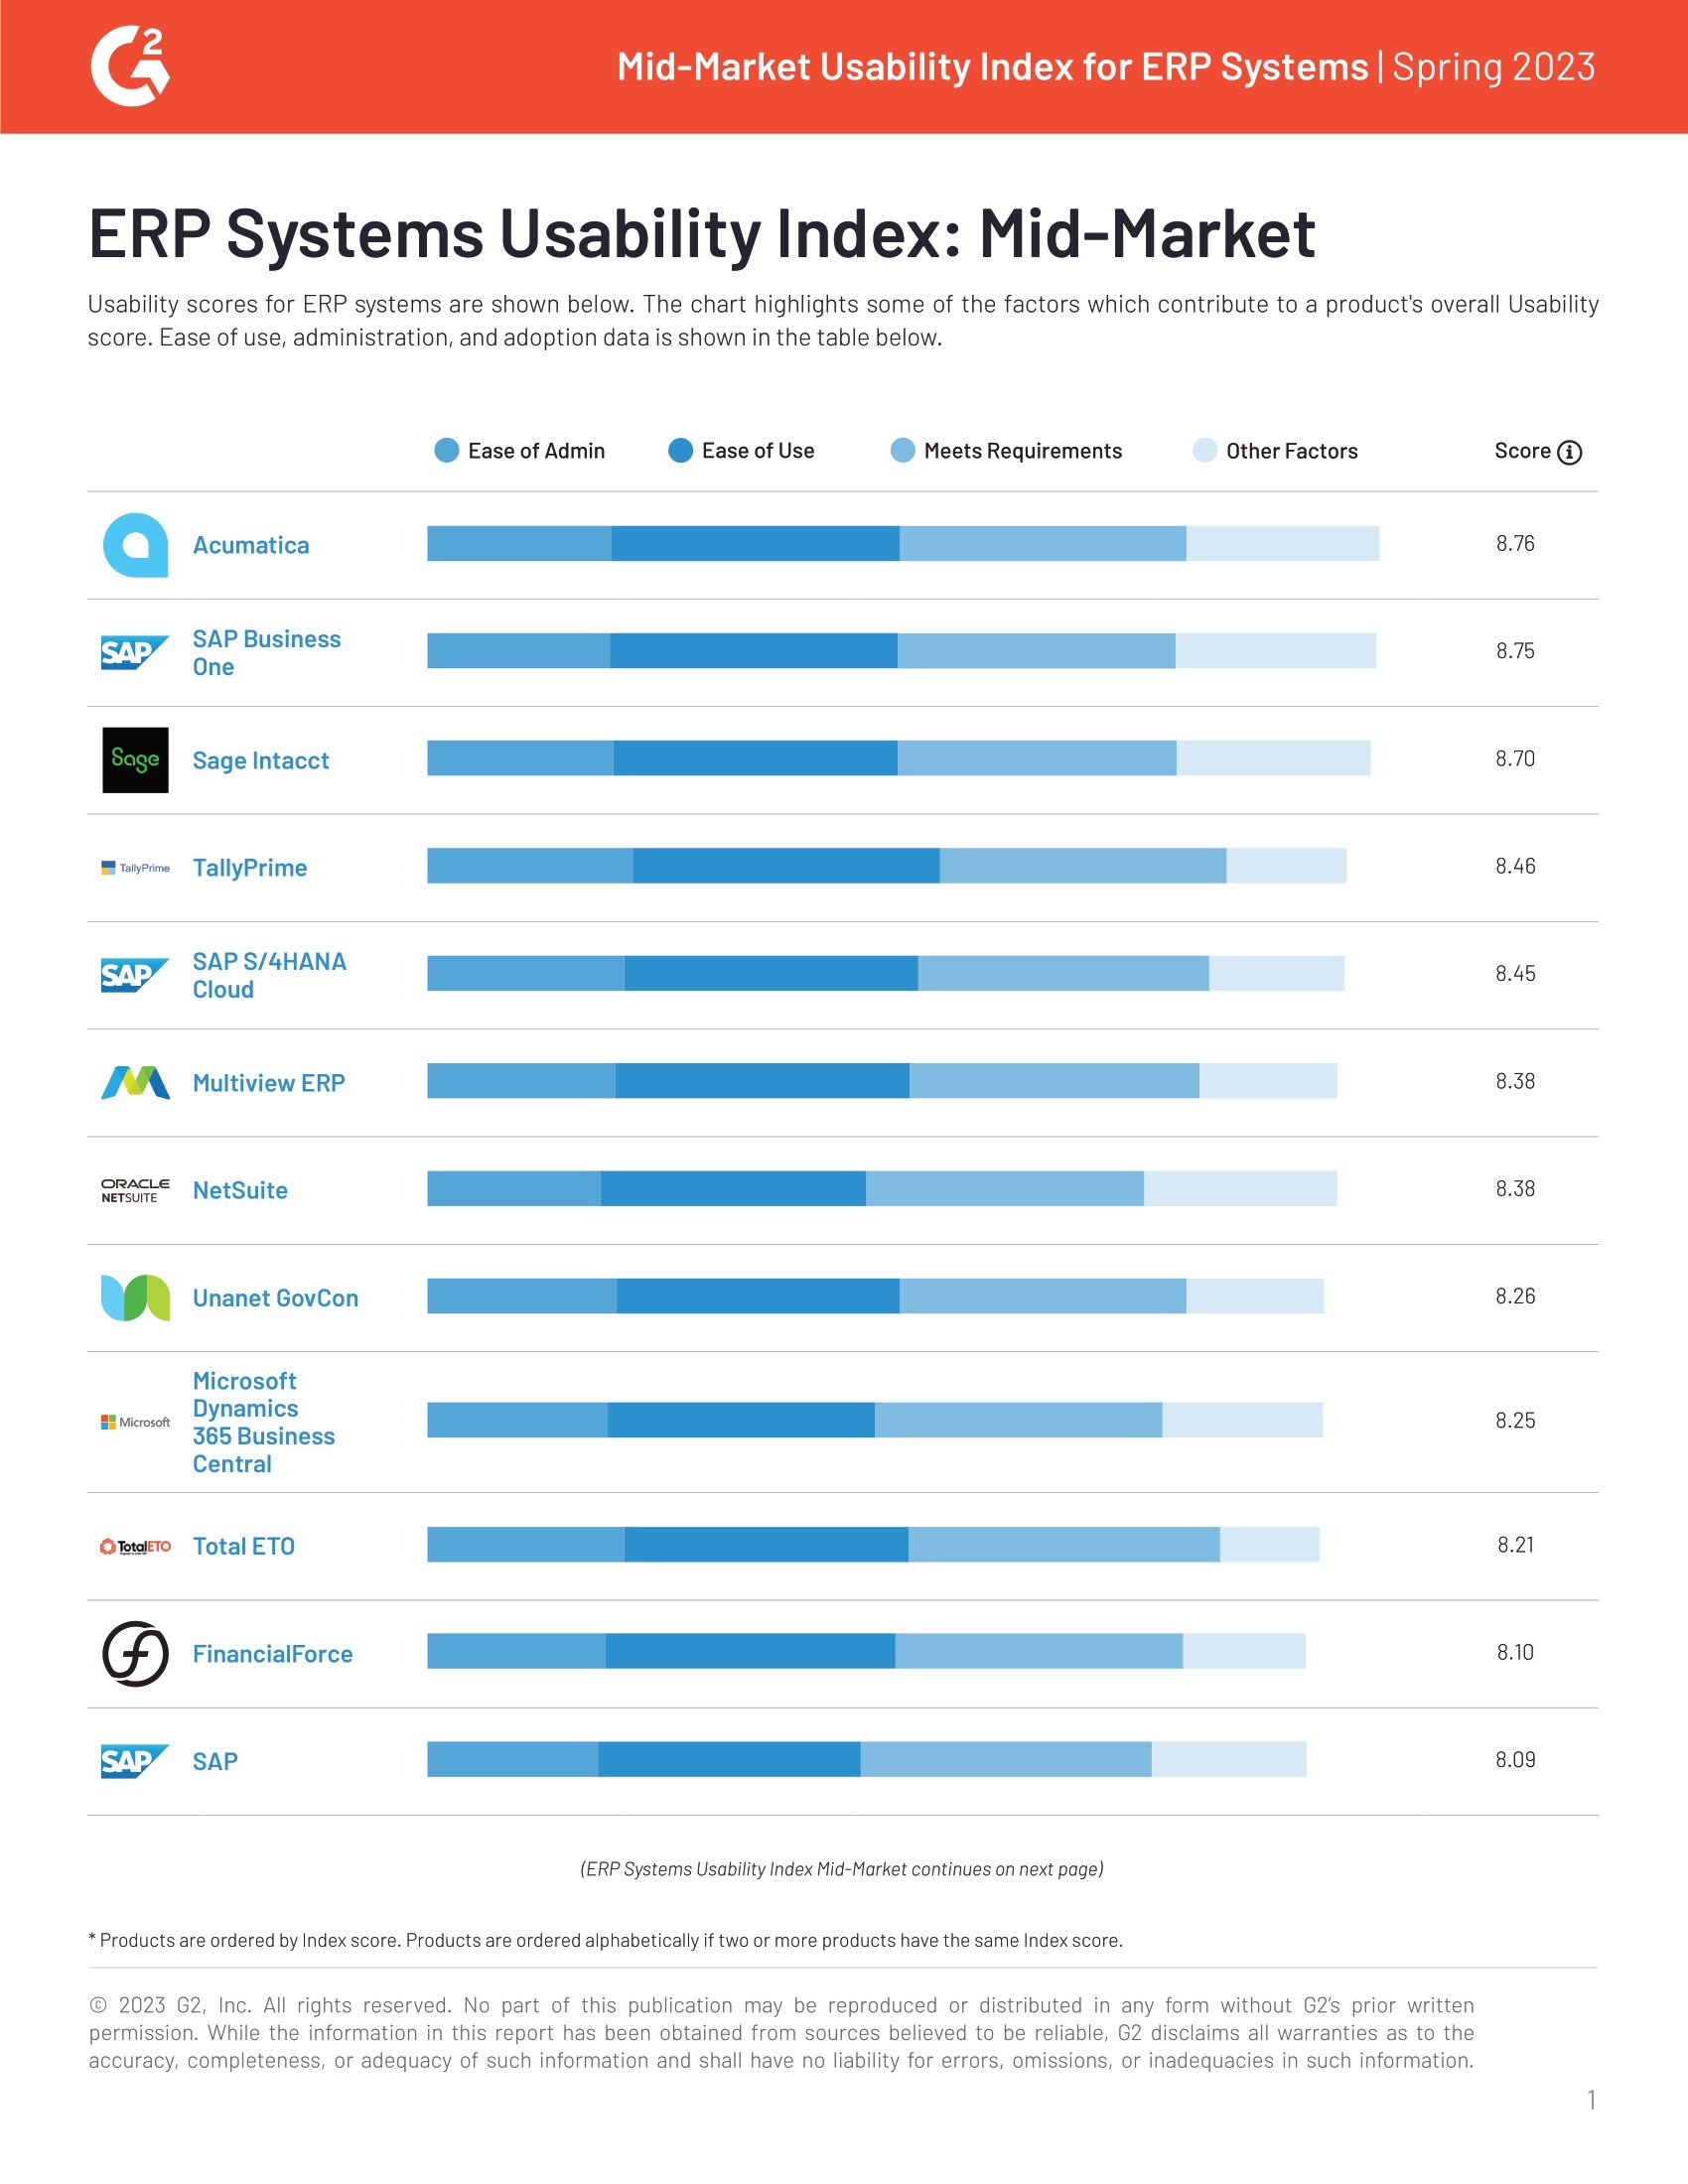 G2 Reviews Acumatica and 34 Other Mid-Market ERPs’ Usability in Spring 2023 Report , page 0